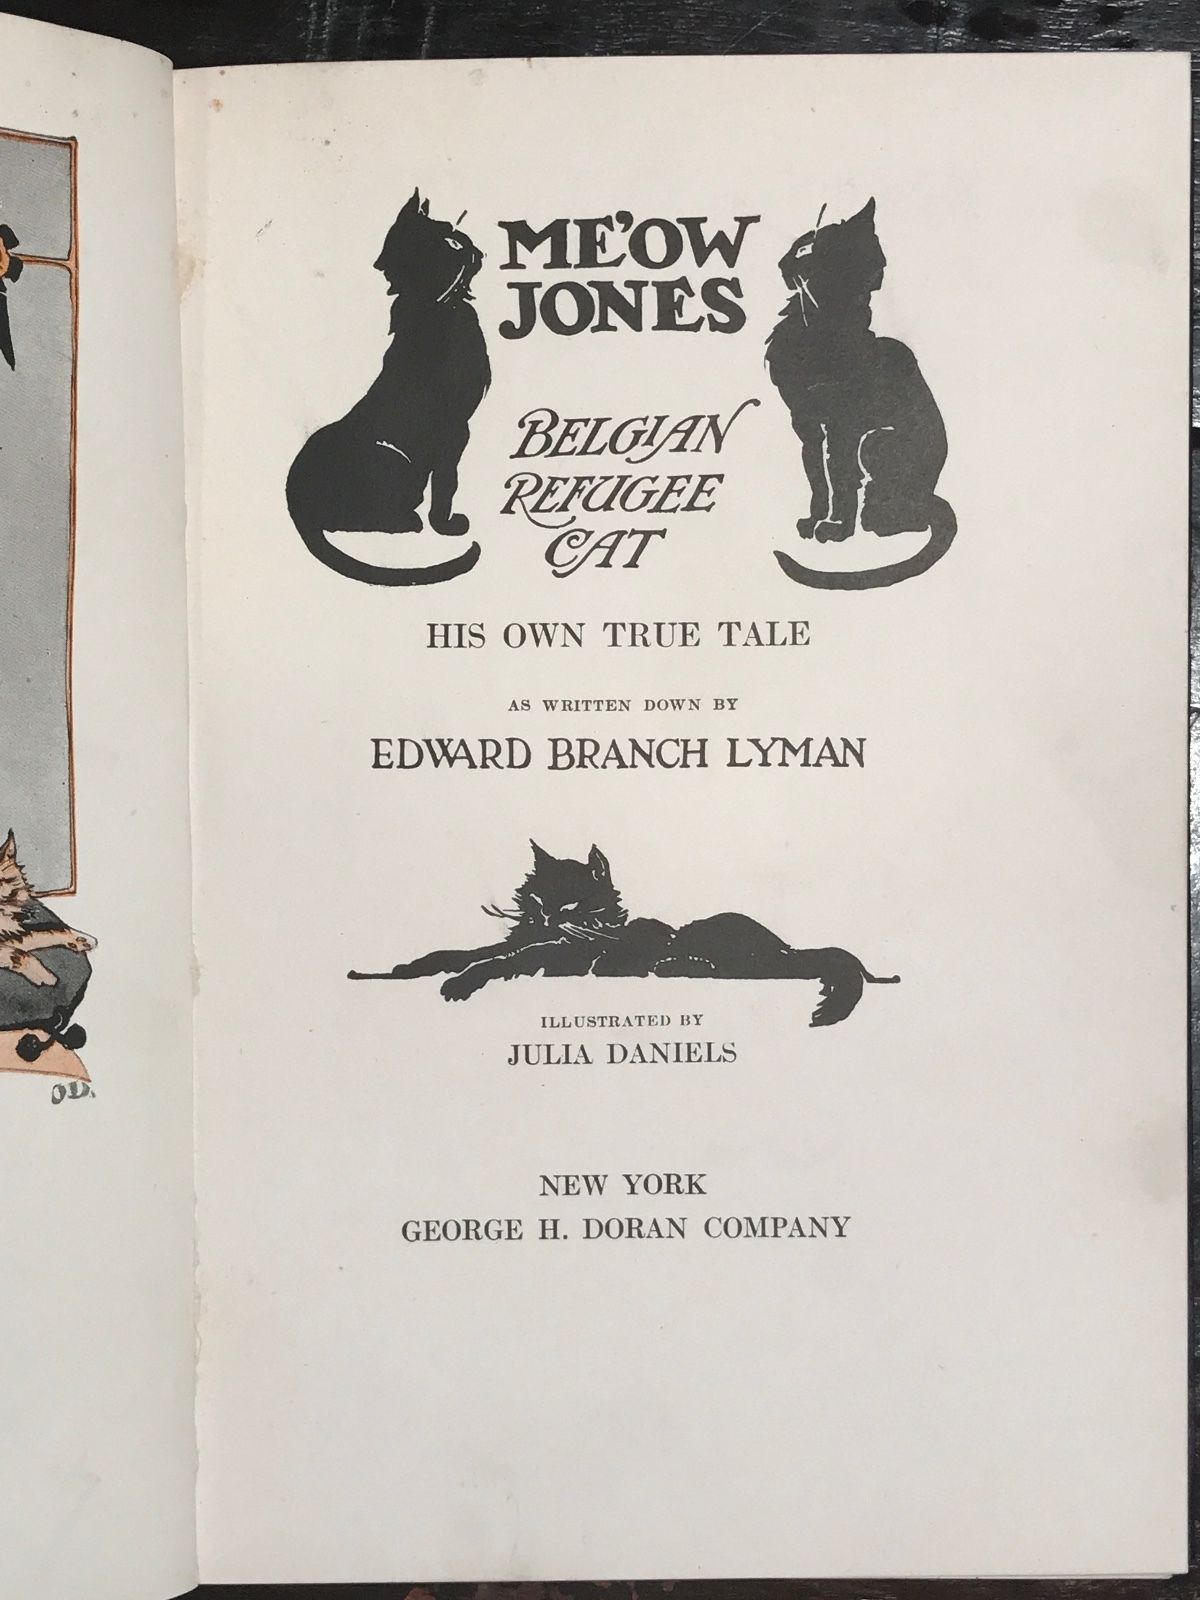 The Book of the Cat' — Story